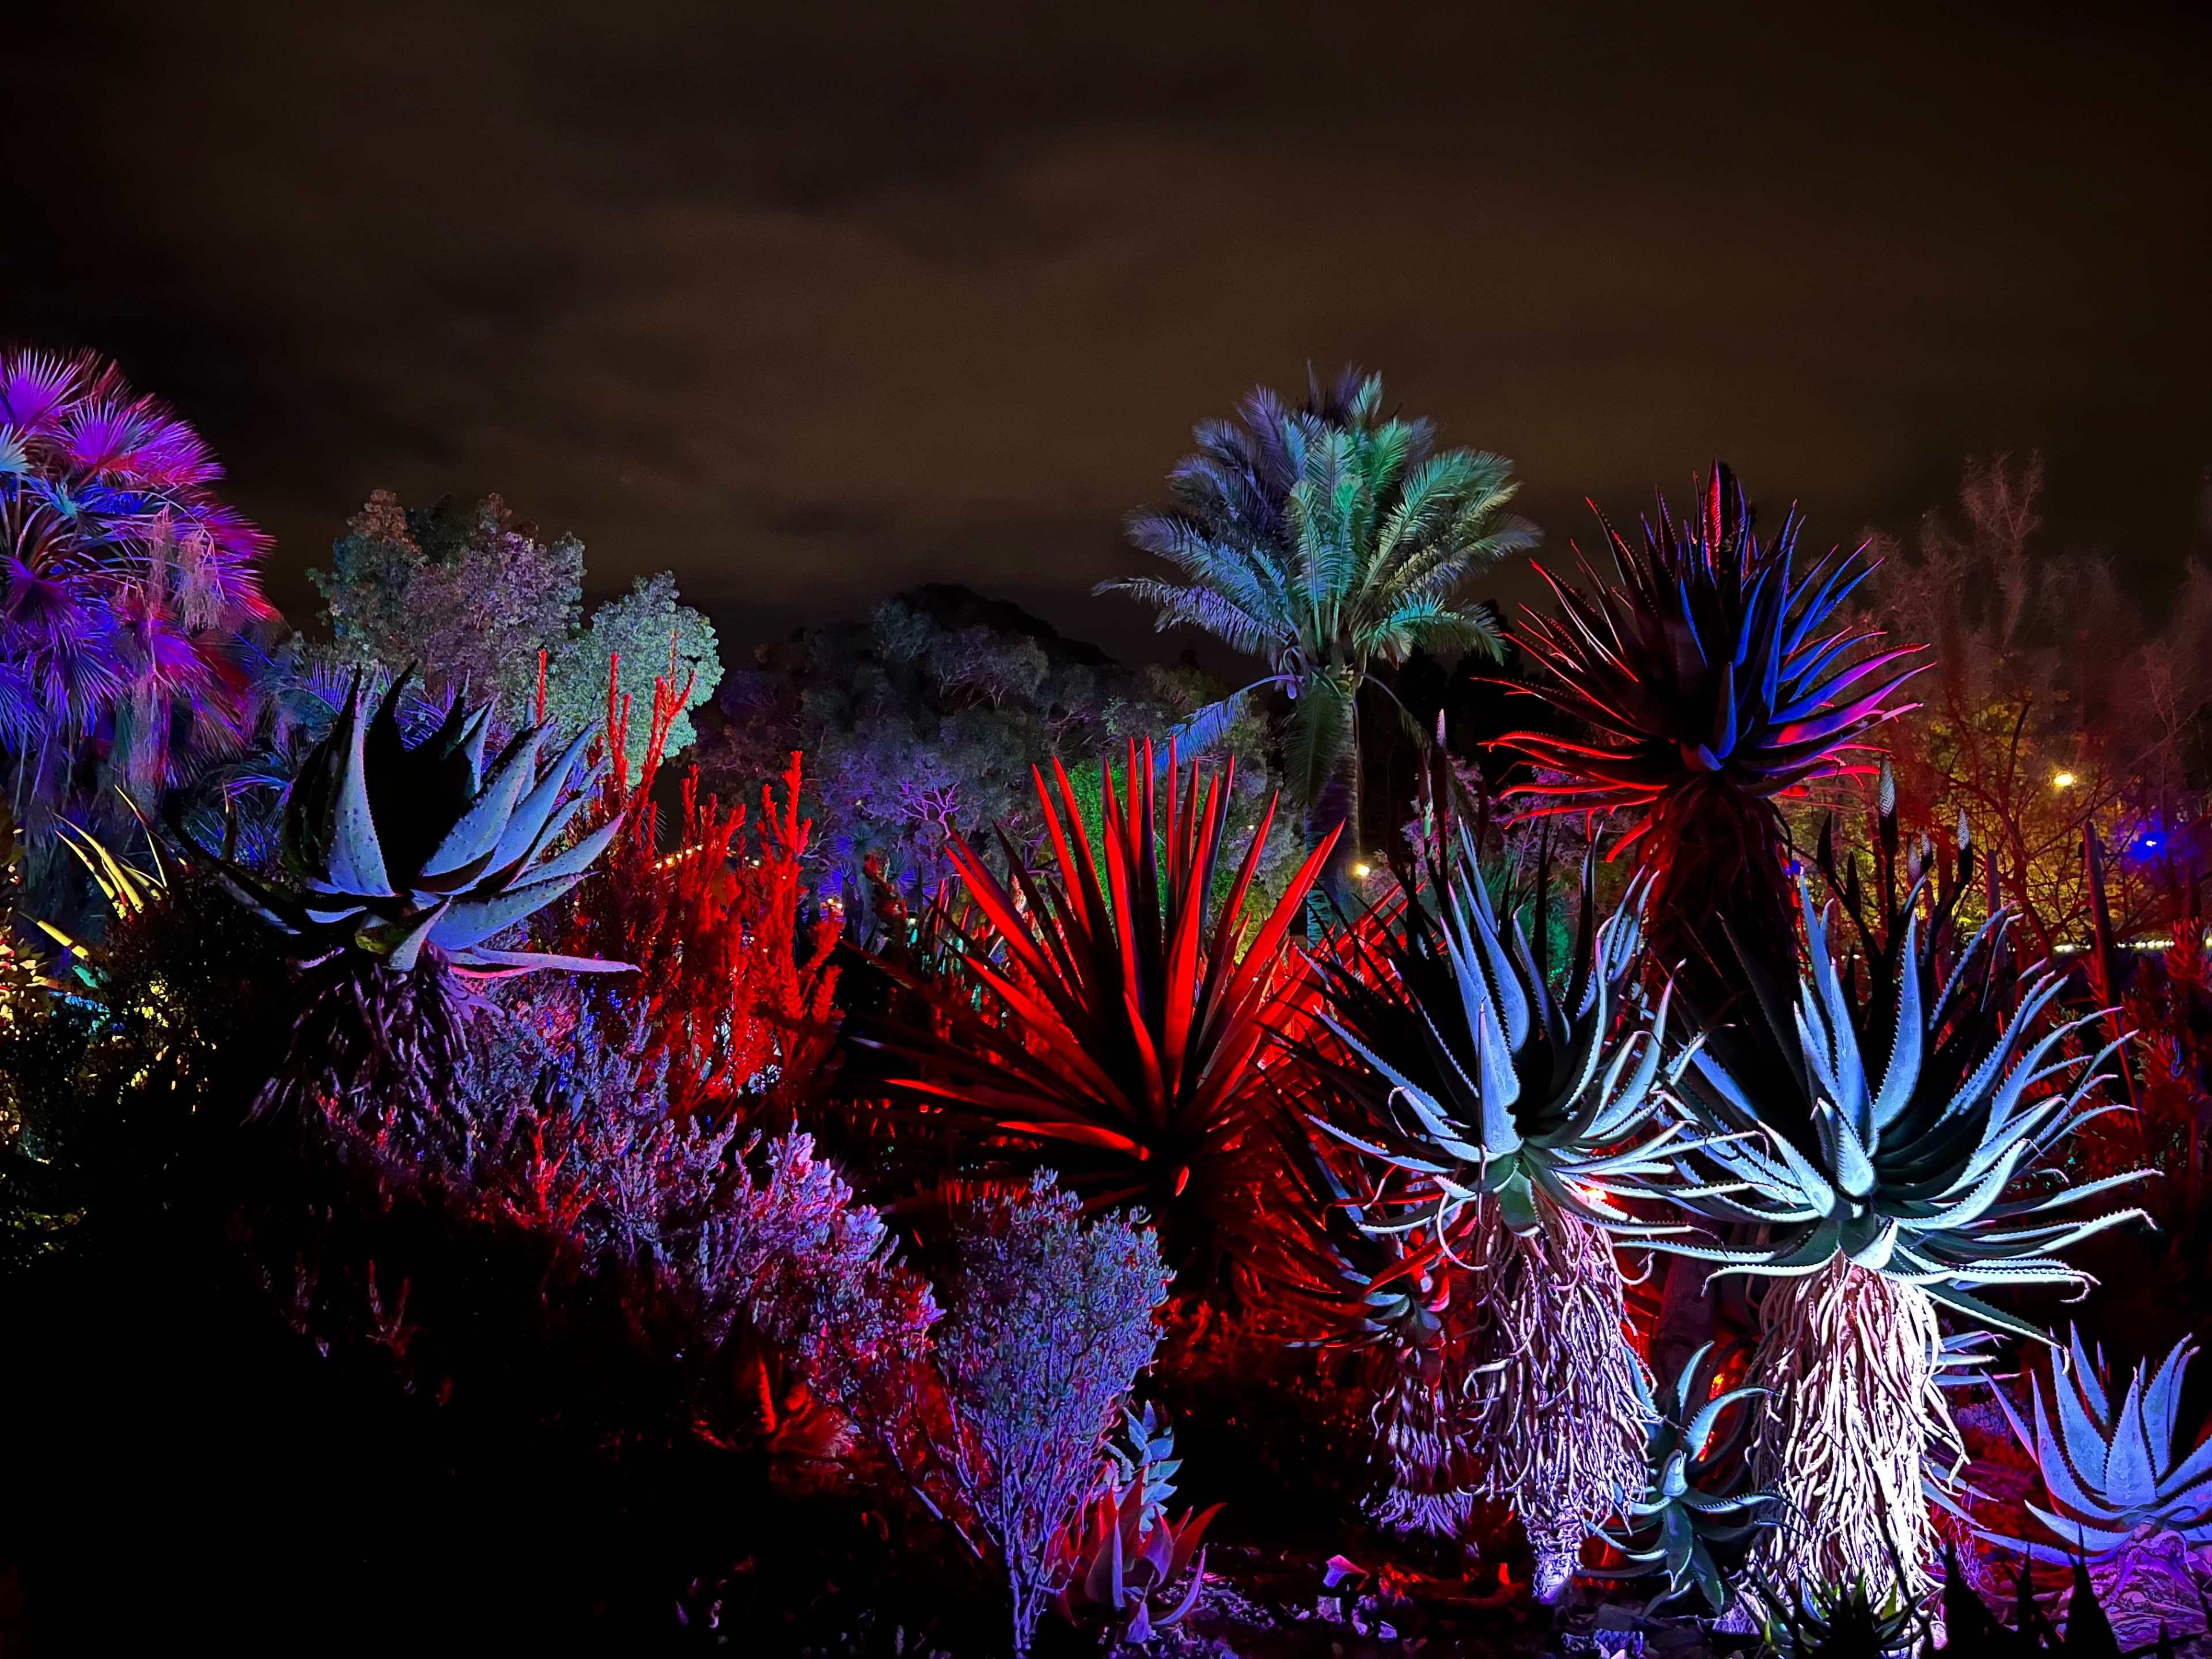 A garden of palms is illuminated in green, purple and blue lights.